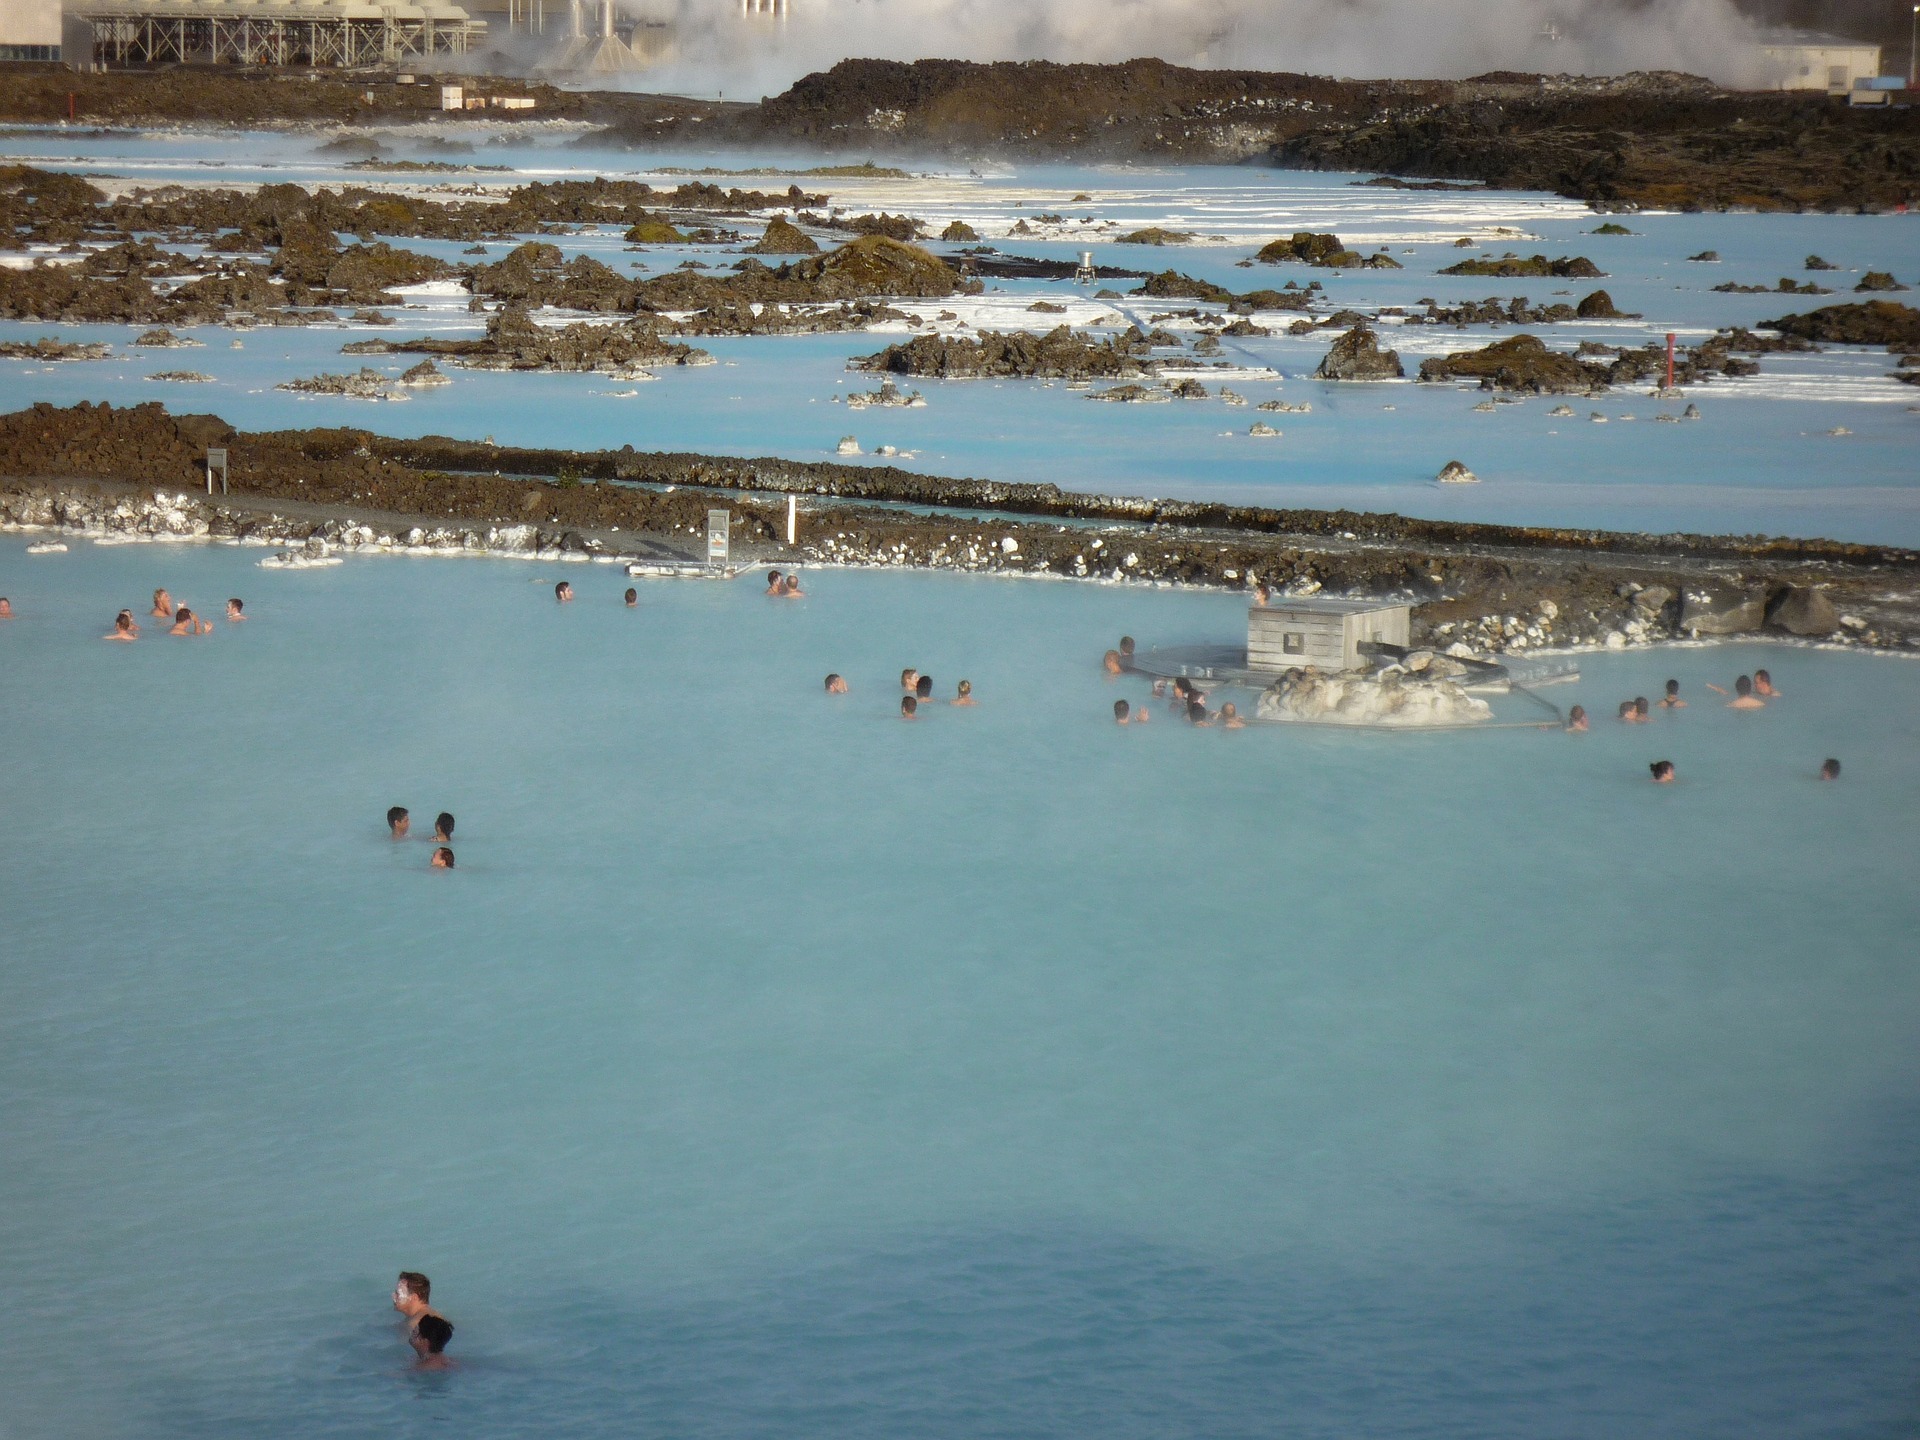 Overview of Blue Lagoon in Iceland with people bathing in the hot water